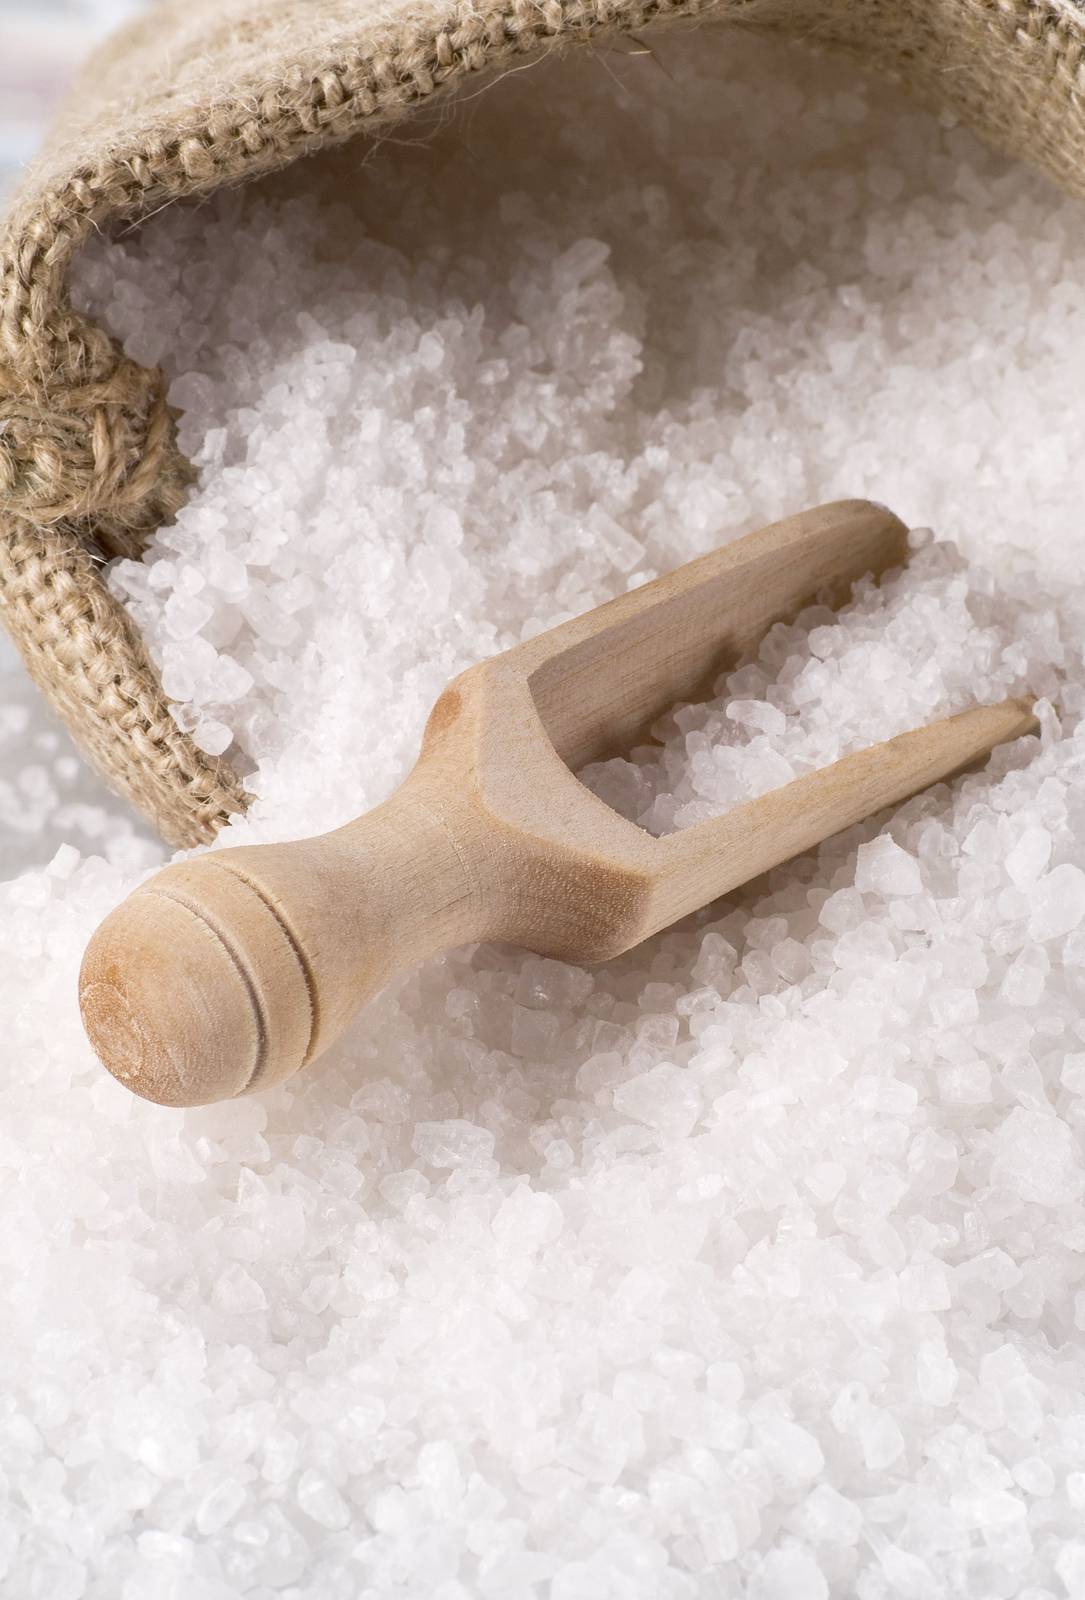 Two Seas Sea Salt Products Contain Range Of Lower Sodium Levels